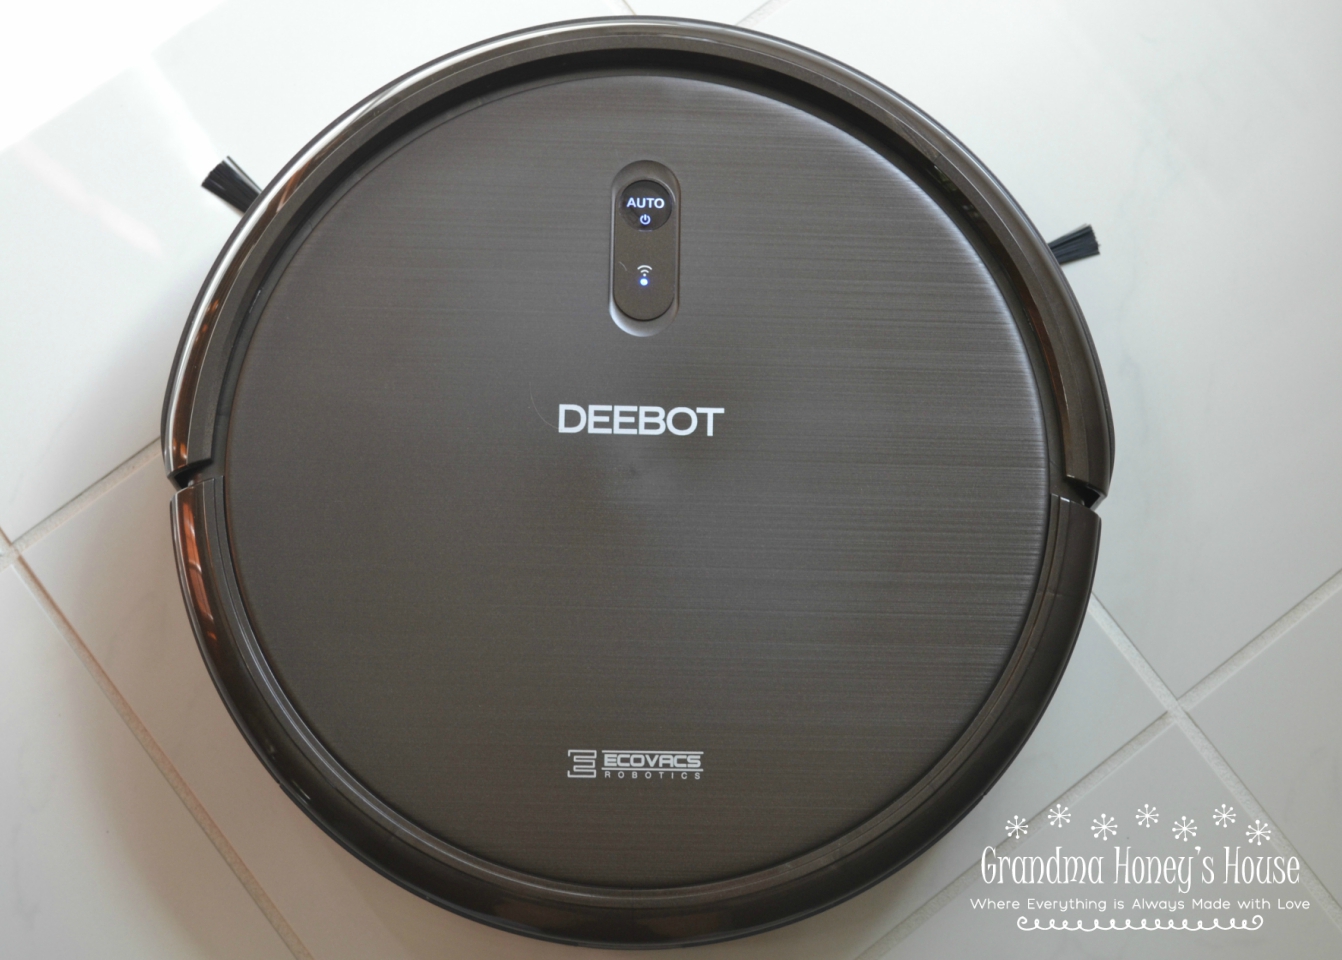 Review and functions of Deebot N79S robotic sweeper.